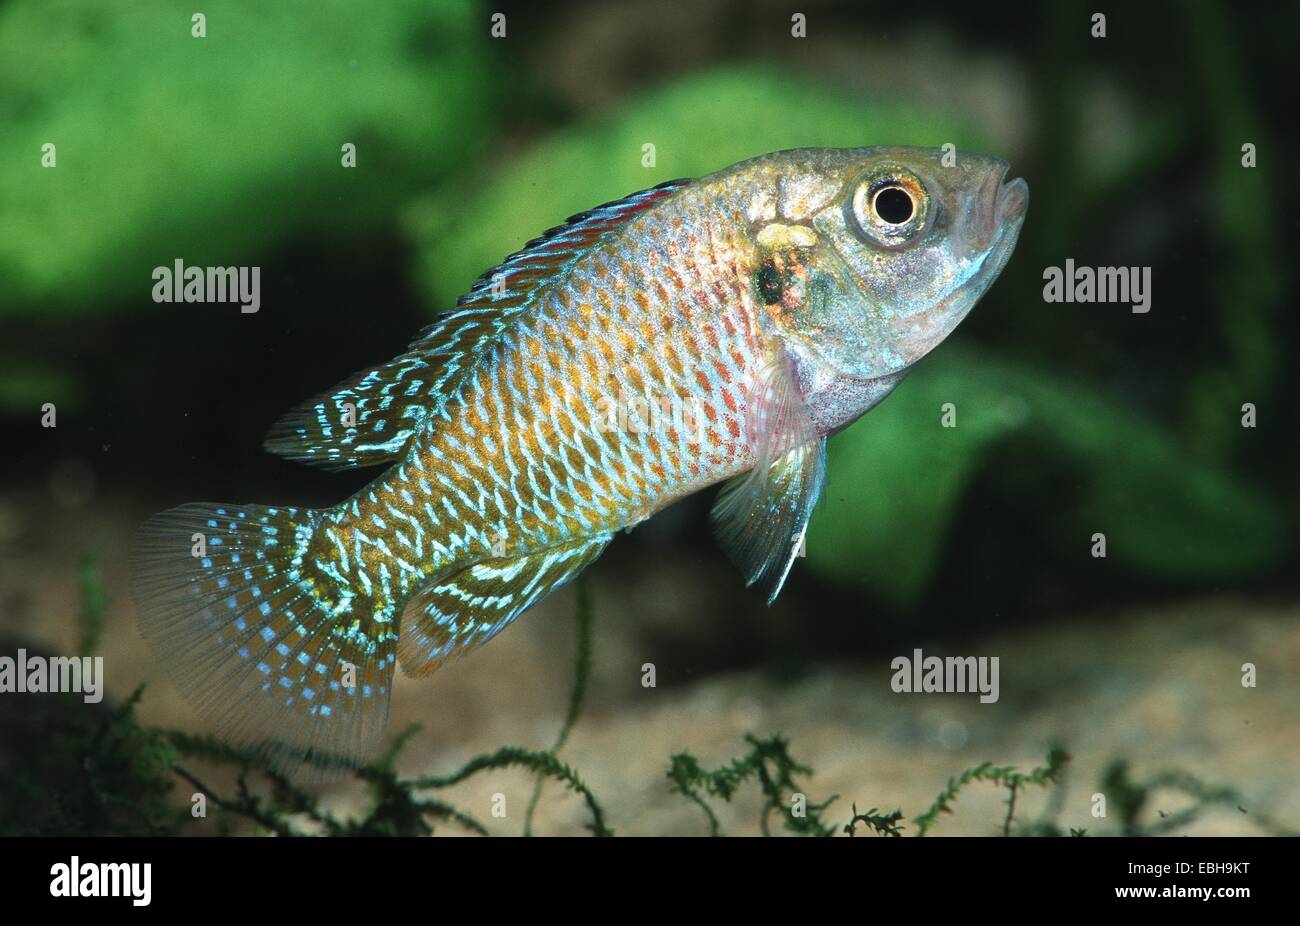 dwarf Egyptian mouthbrooder (Pseudocrenilabrus multicolor). Stock Photo